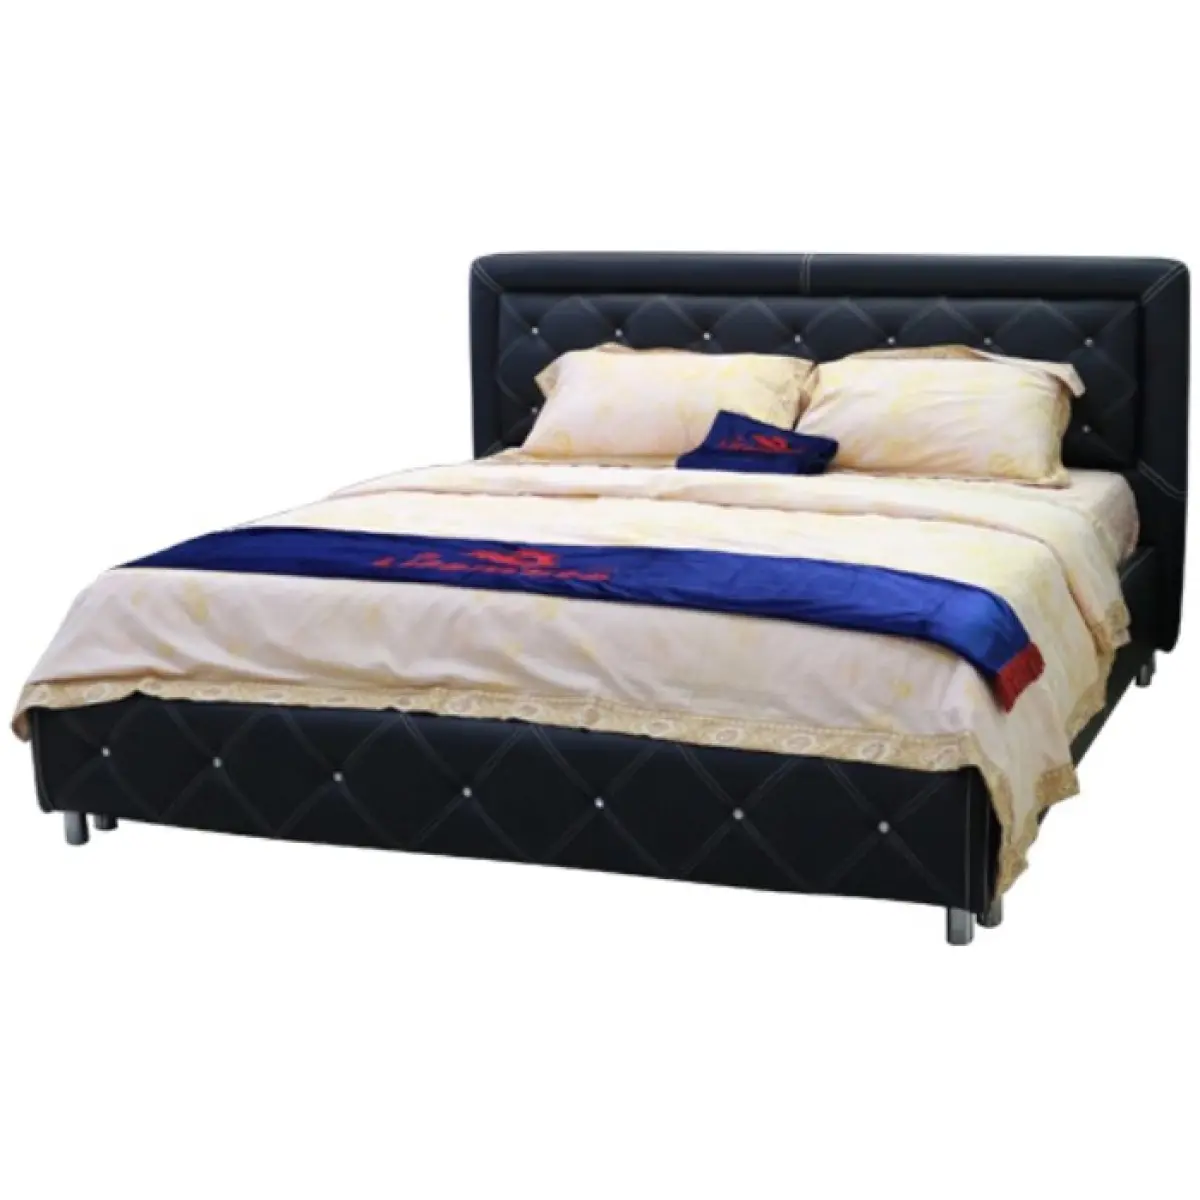 Lifemate Black Leather Bed(BH212)